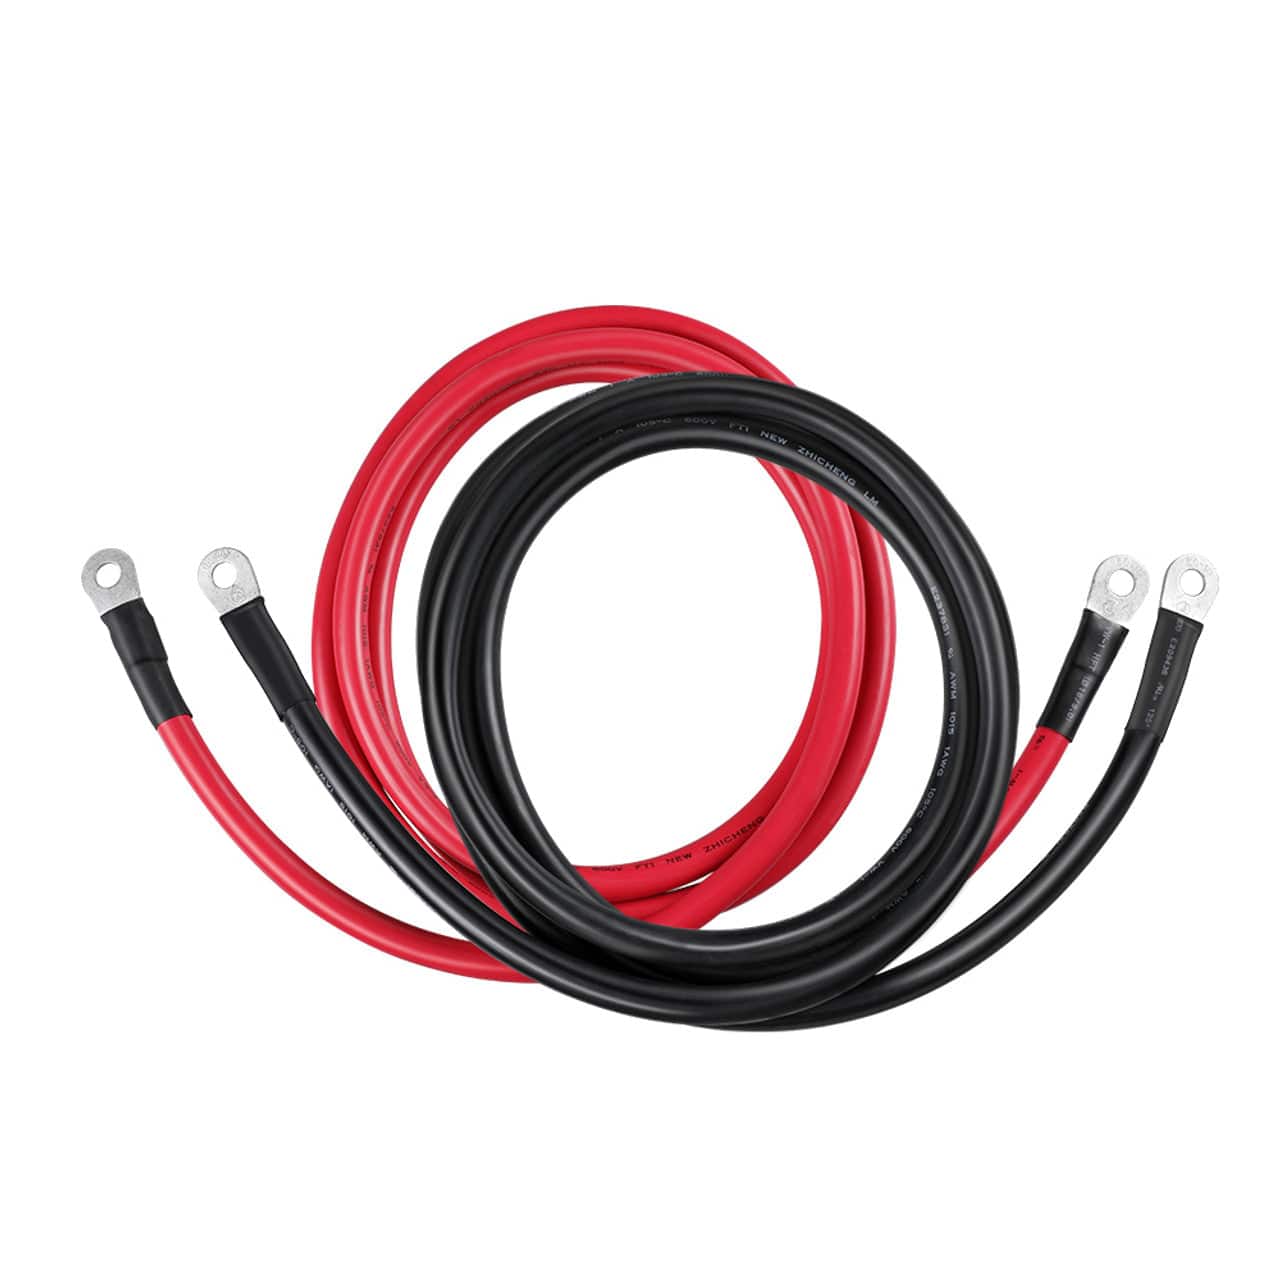 Renogy Battery Inverter Cables for 3/8 in Lugs Renogy 5Ft 4AWG Solar Wiring Cables & Connectors